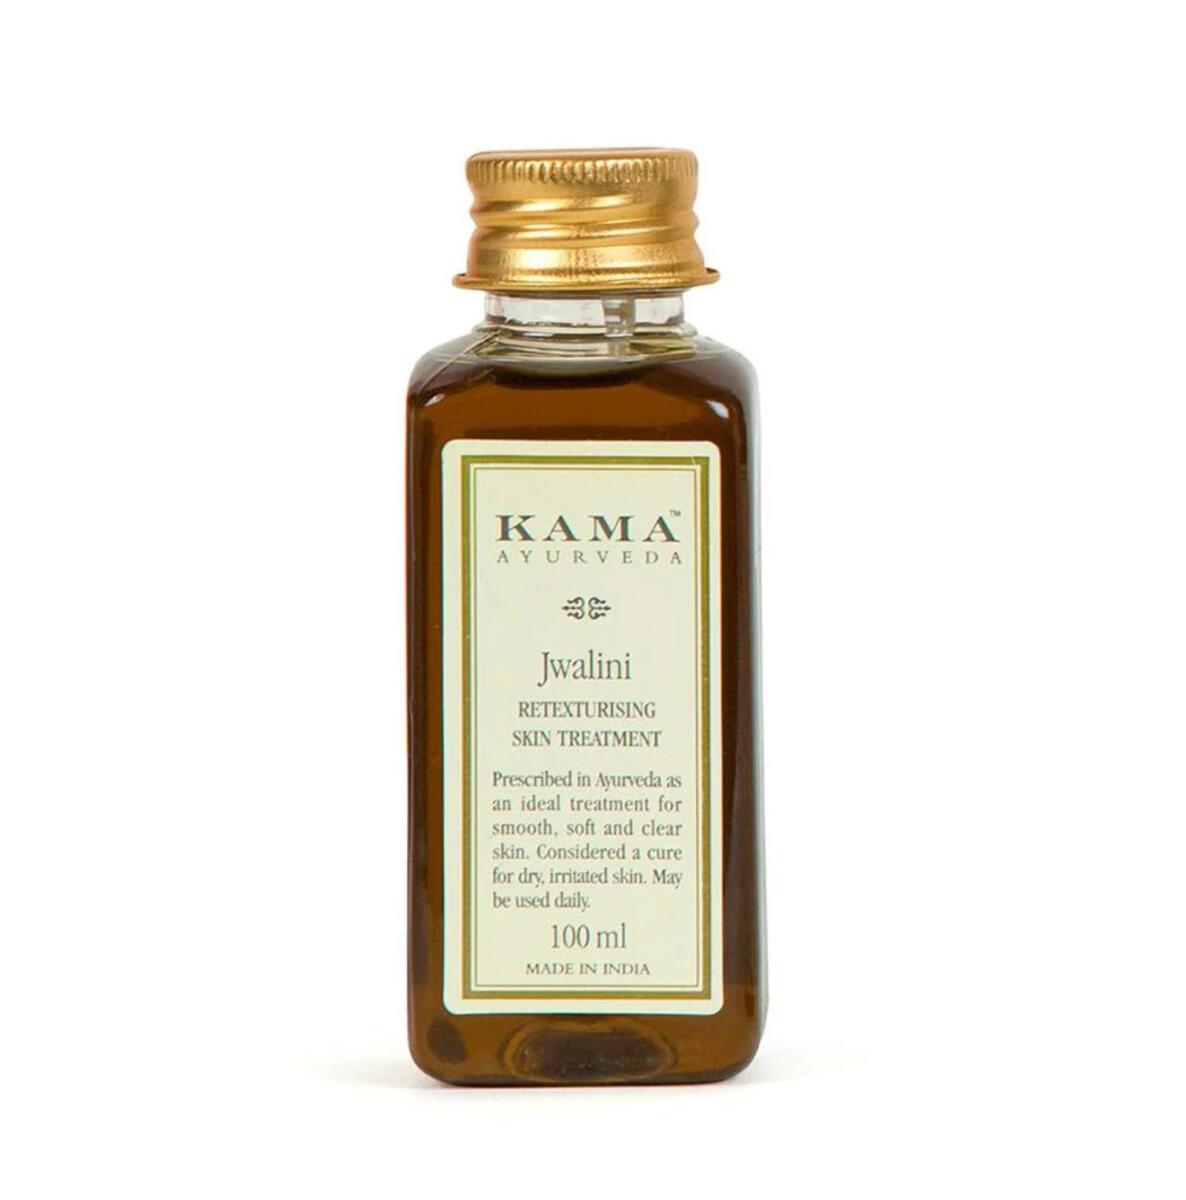 This skin treatment oil is enriched with the nourishing properties of coconut milk and sesame oil, promising to deliver irresistibly smooth, baby-soft skin. Kama Ayurveda avl from misspalettable.com, Dh105